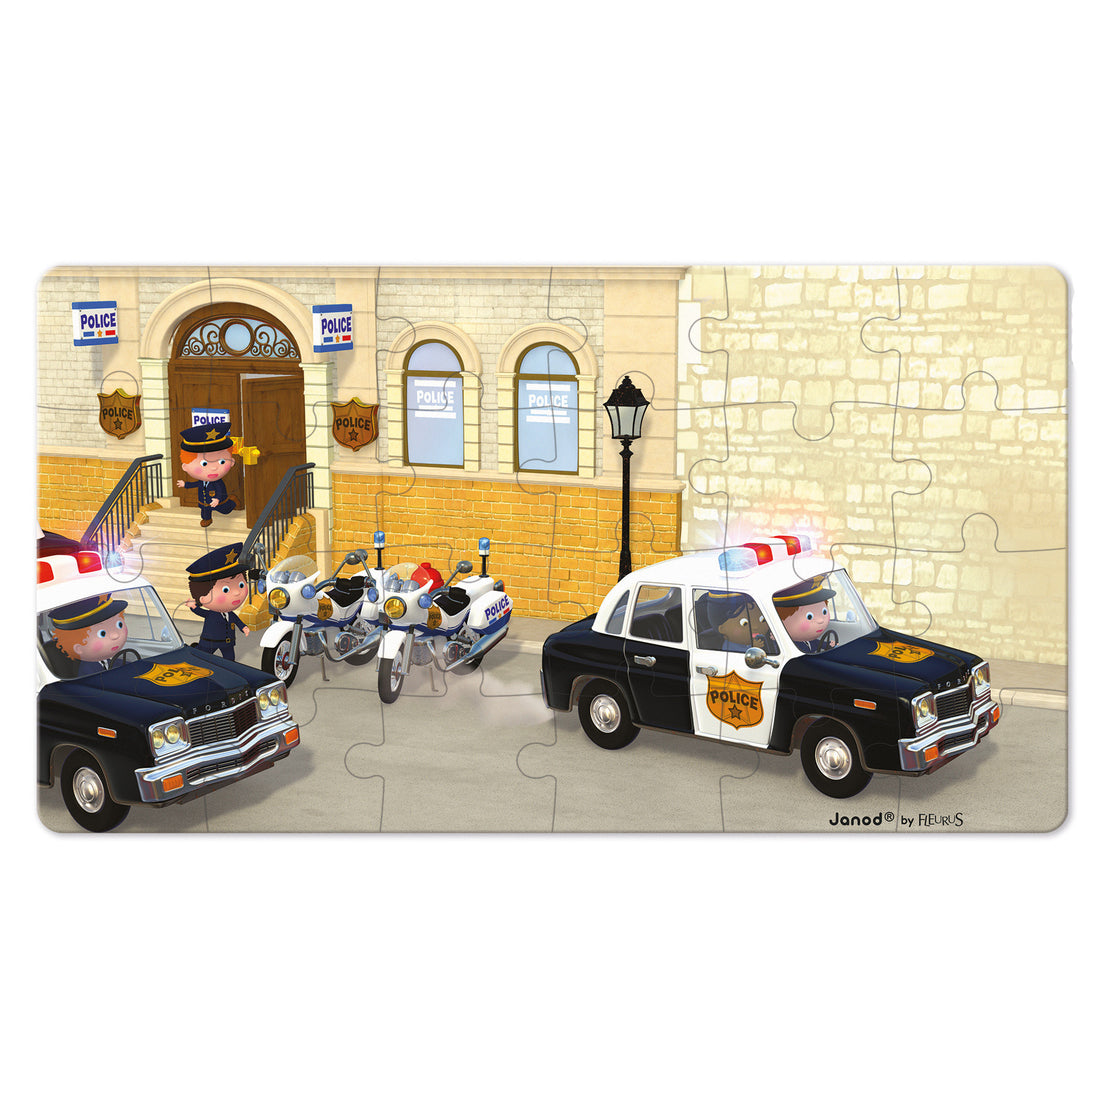 janod-lovely-puzzles-brice's-police-car-02